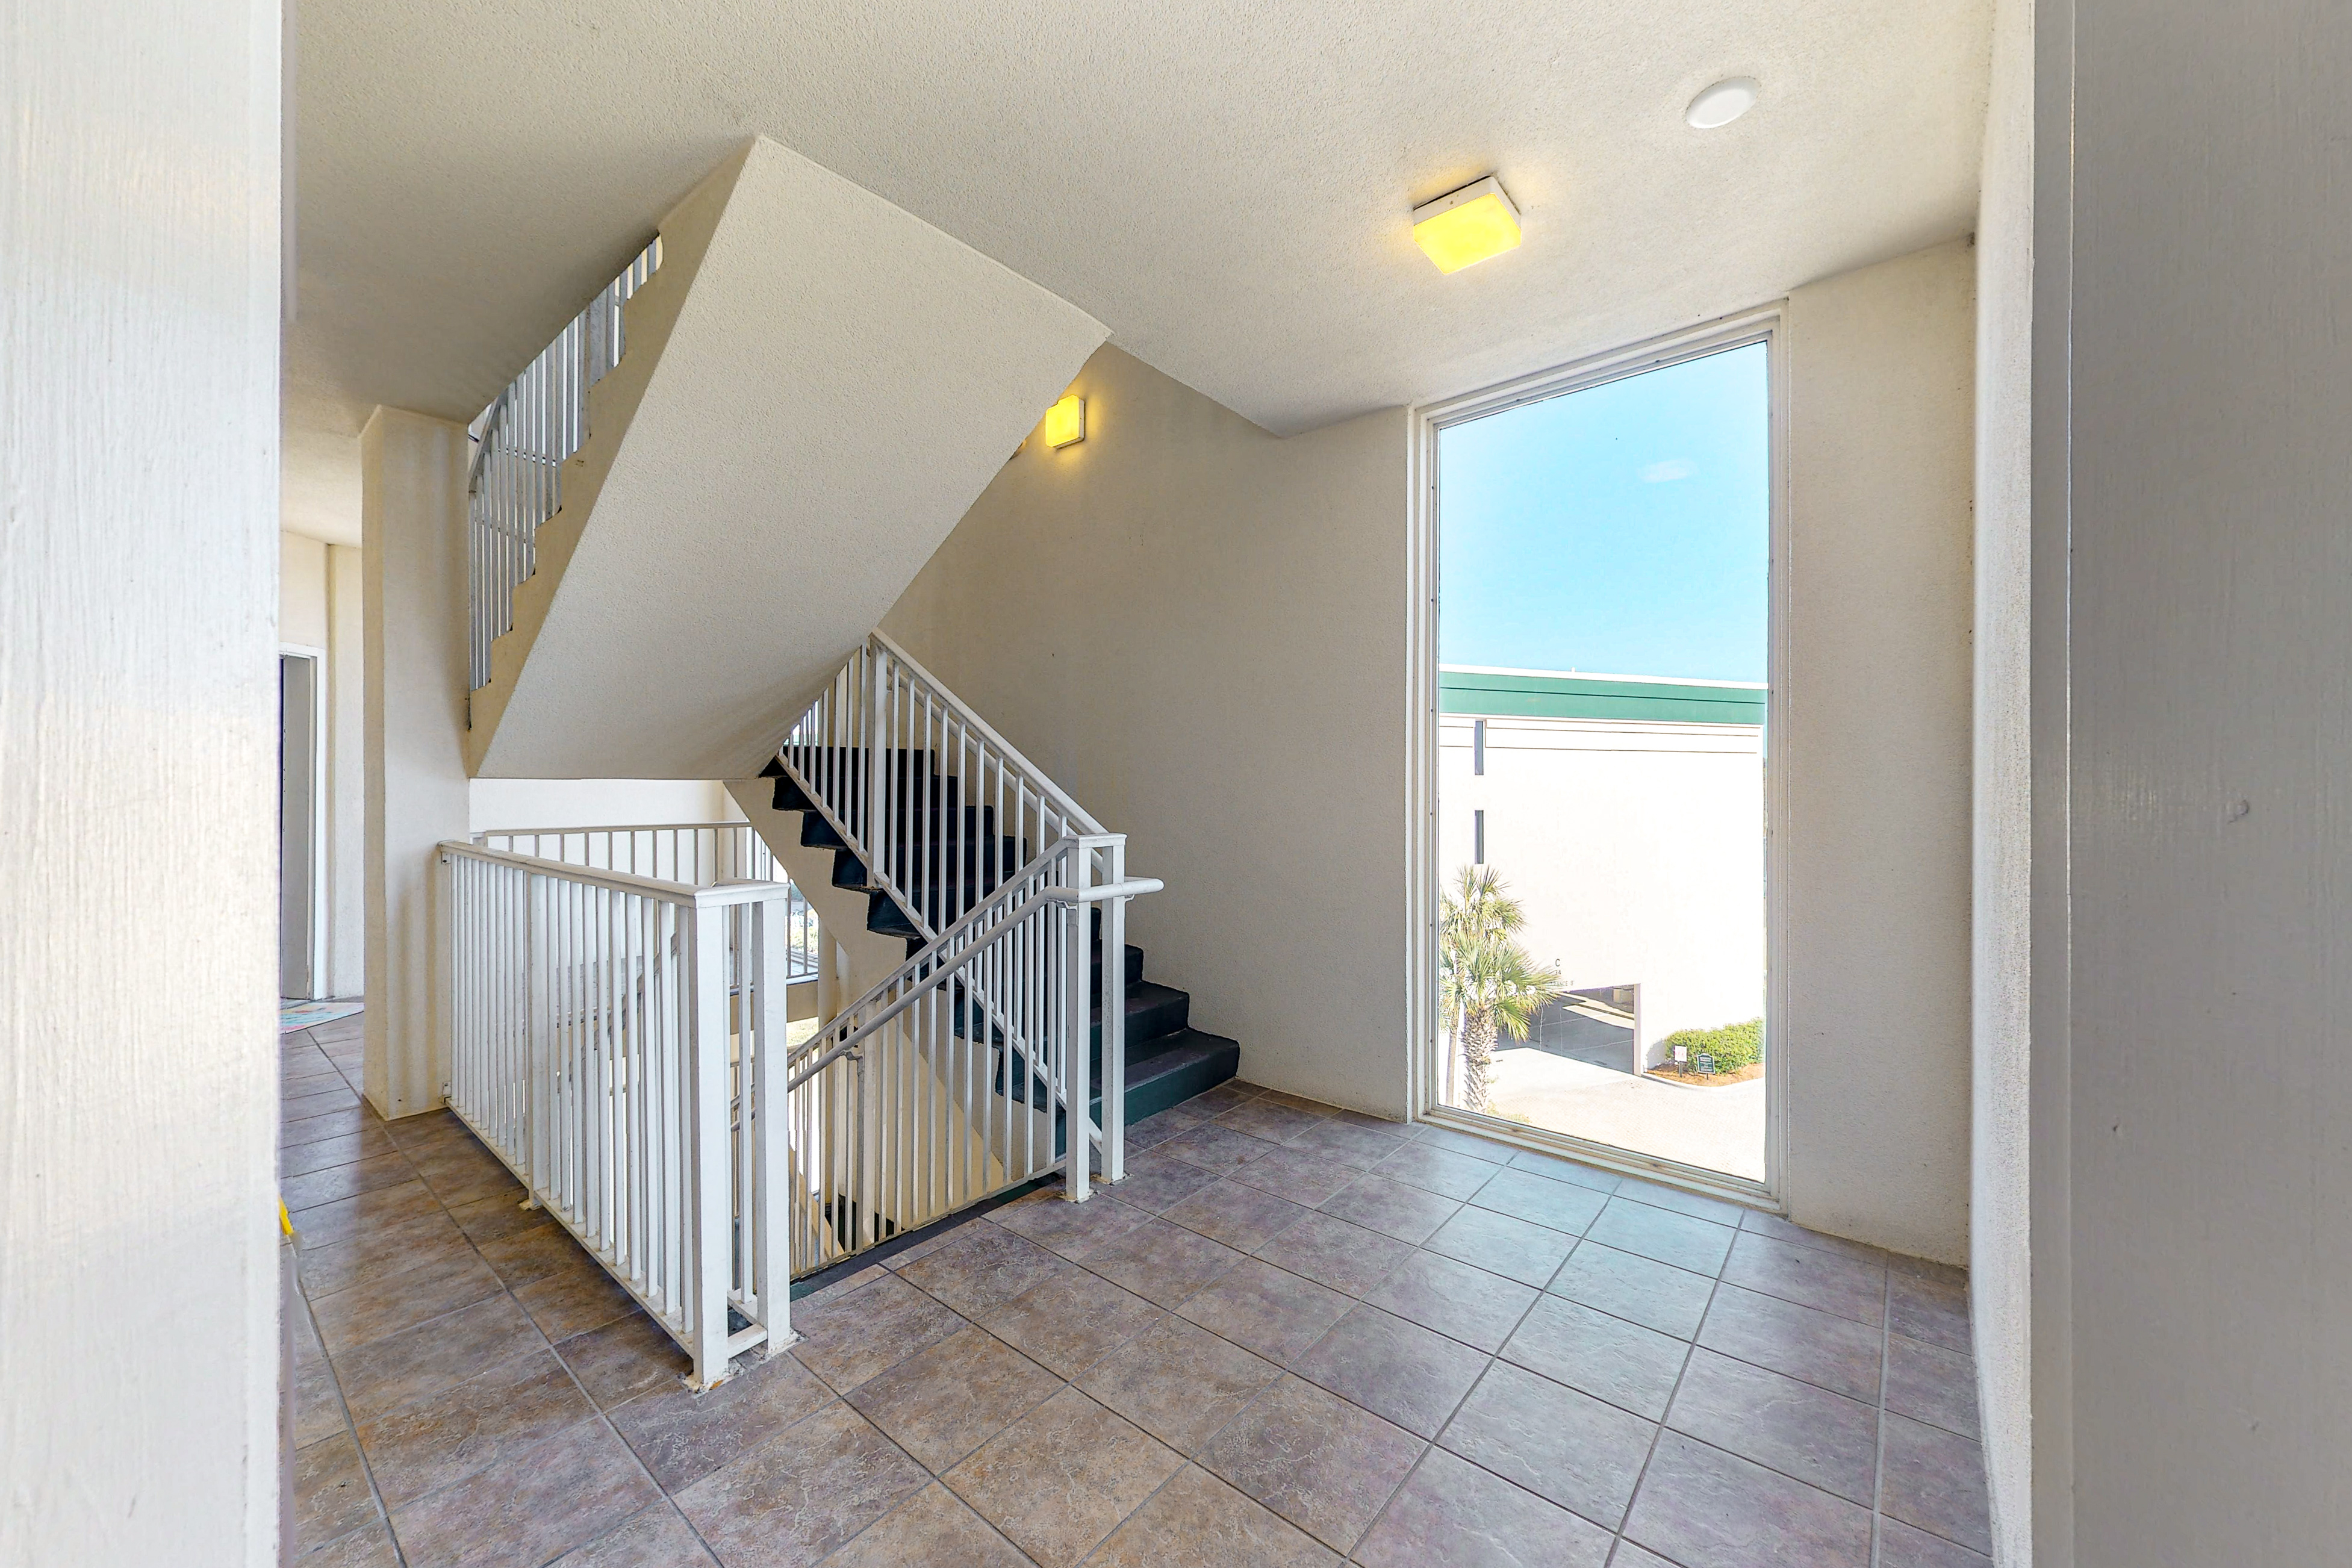 Dunes of Seagrove A301 Condo rental in Dunes of Seagrove in Highway 30-A Florida - #25